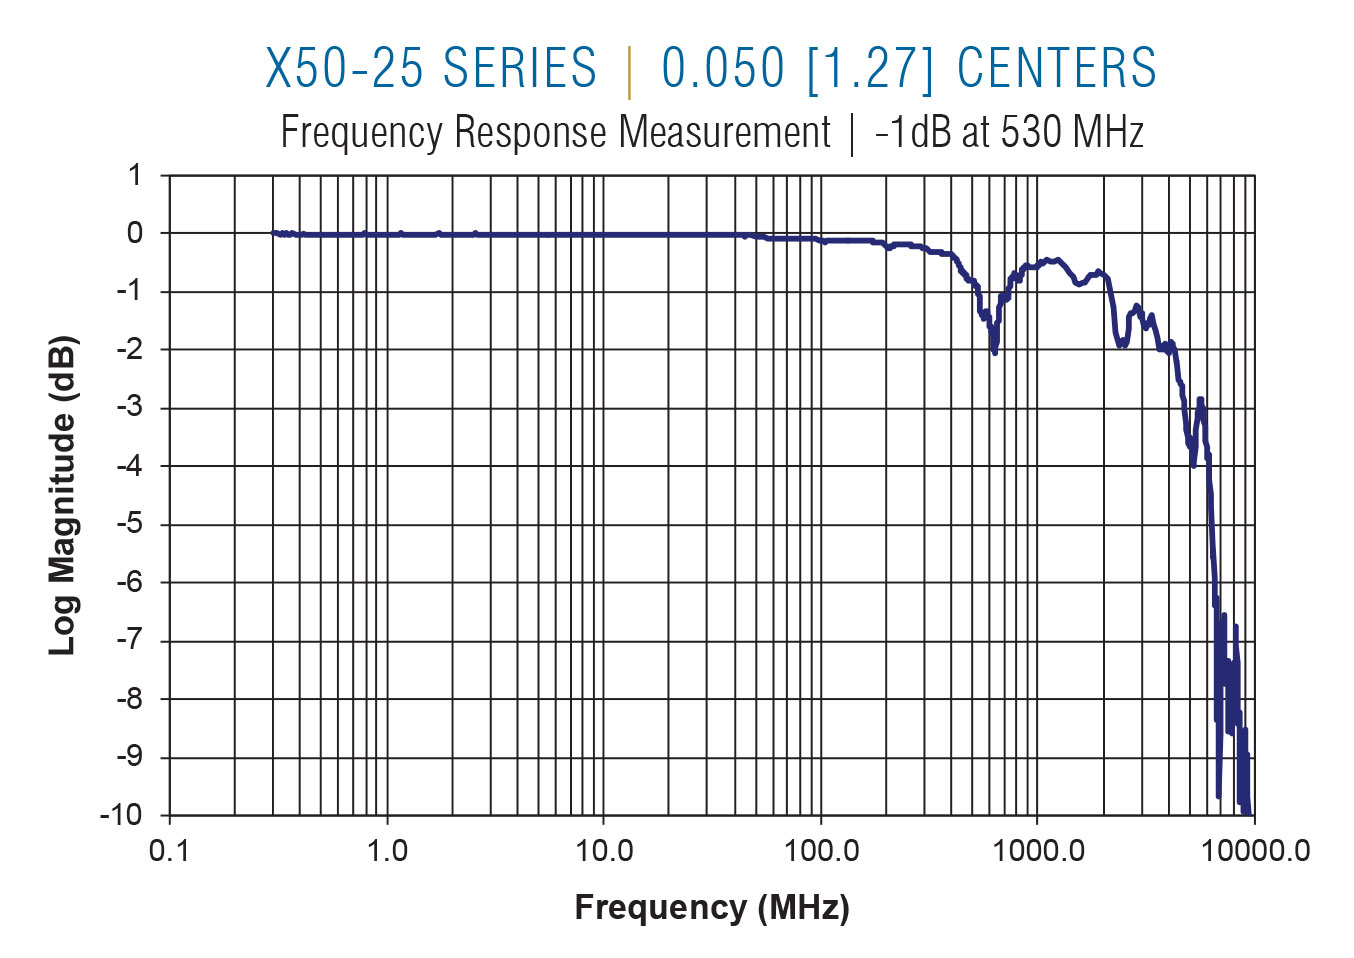 X50-25 Frequency on 0.050 centers